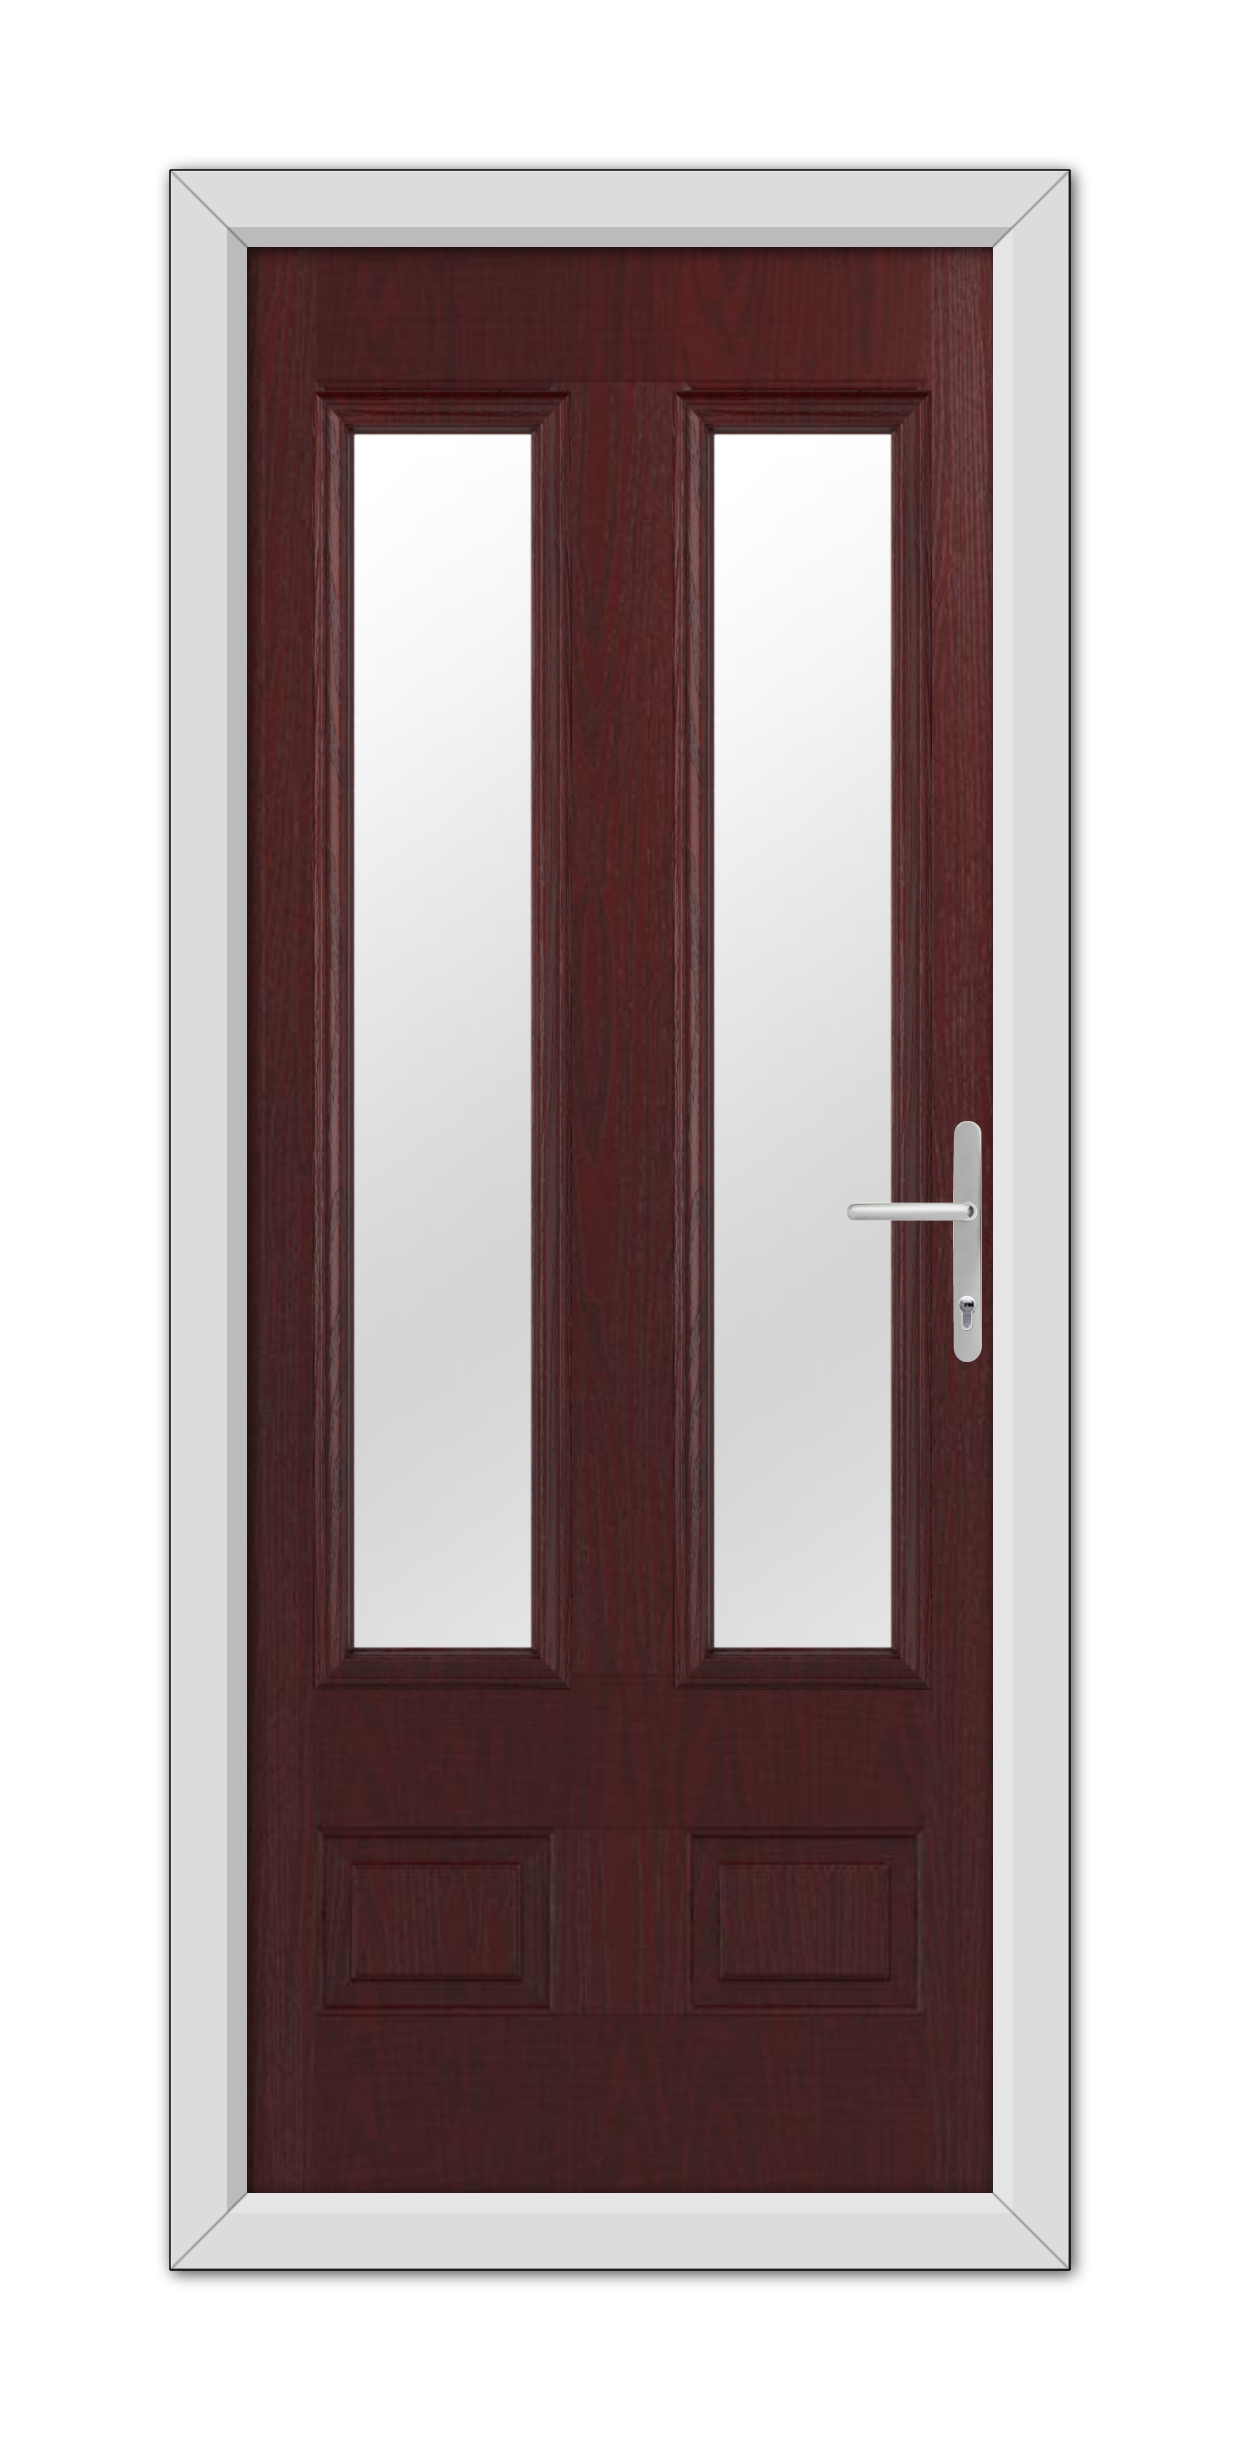 A modern Rosewood Aston Glazed 2 Composite Door with two vertical glass panels, framed in white, featuring a metallic handle on the right side.